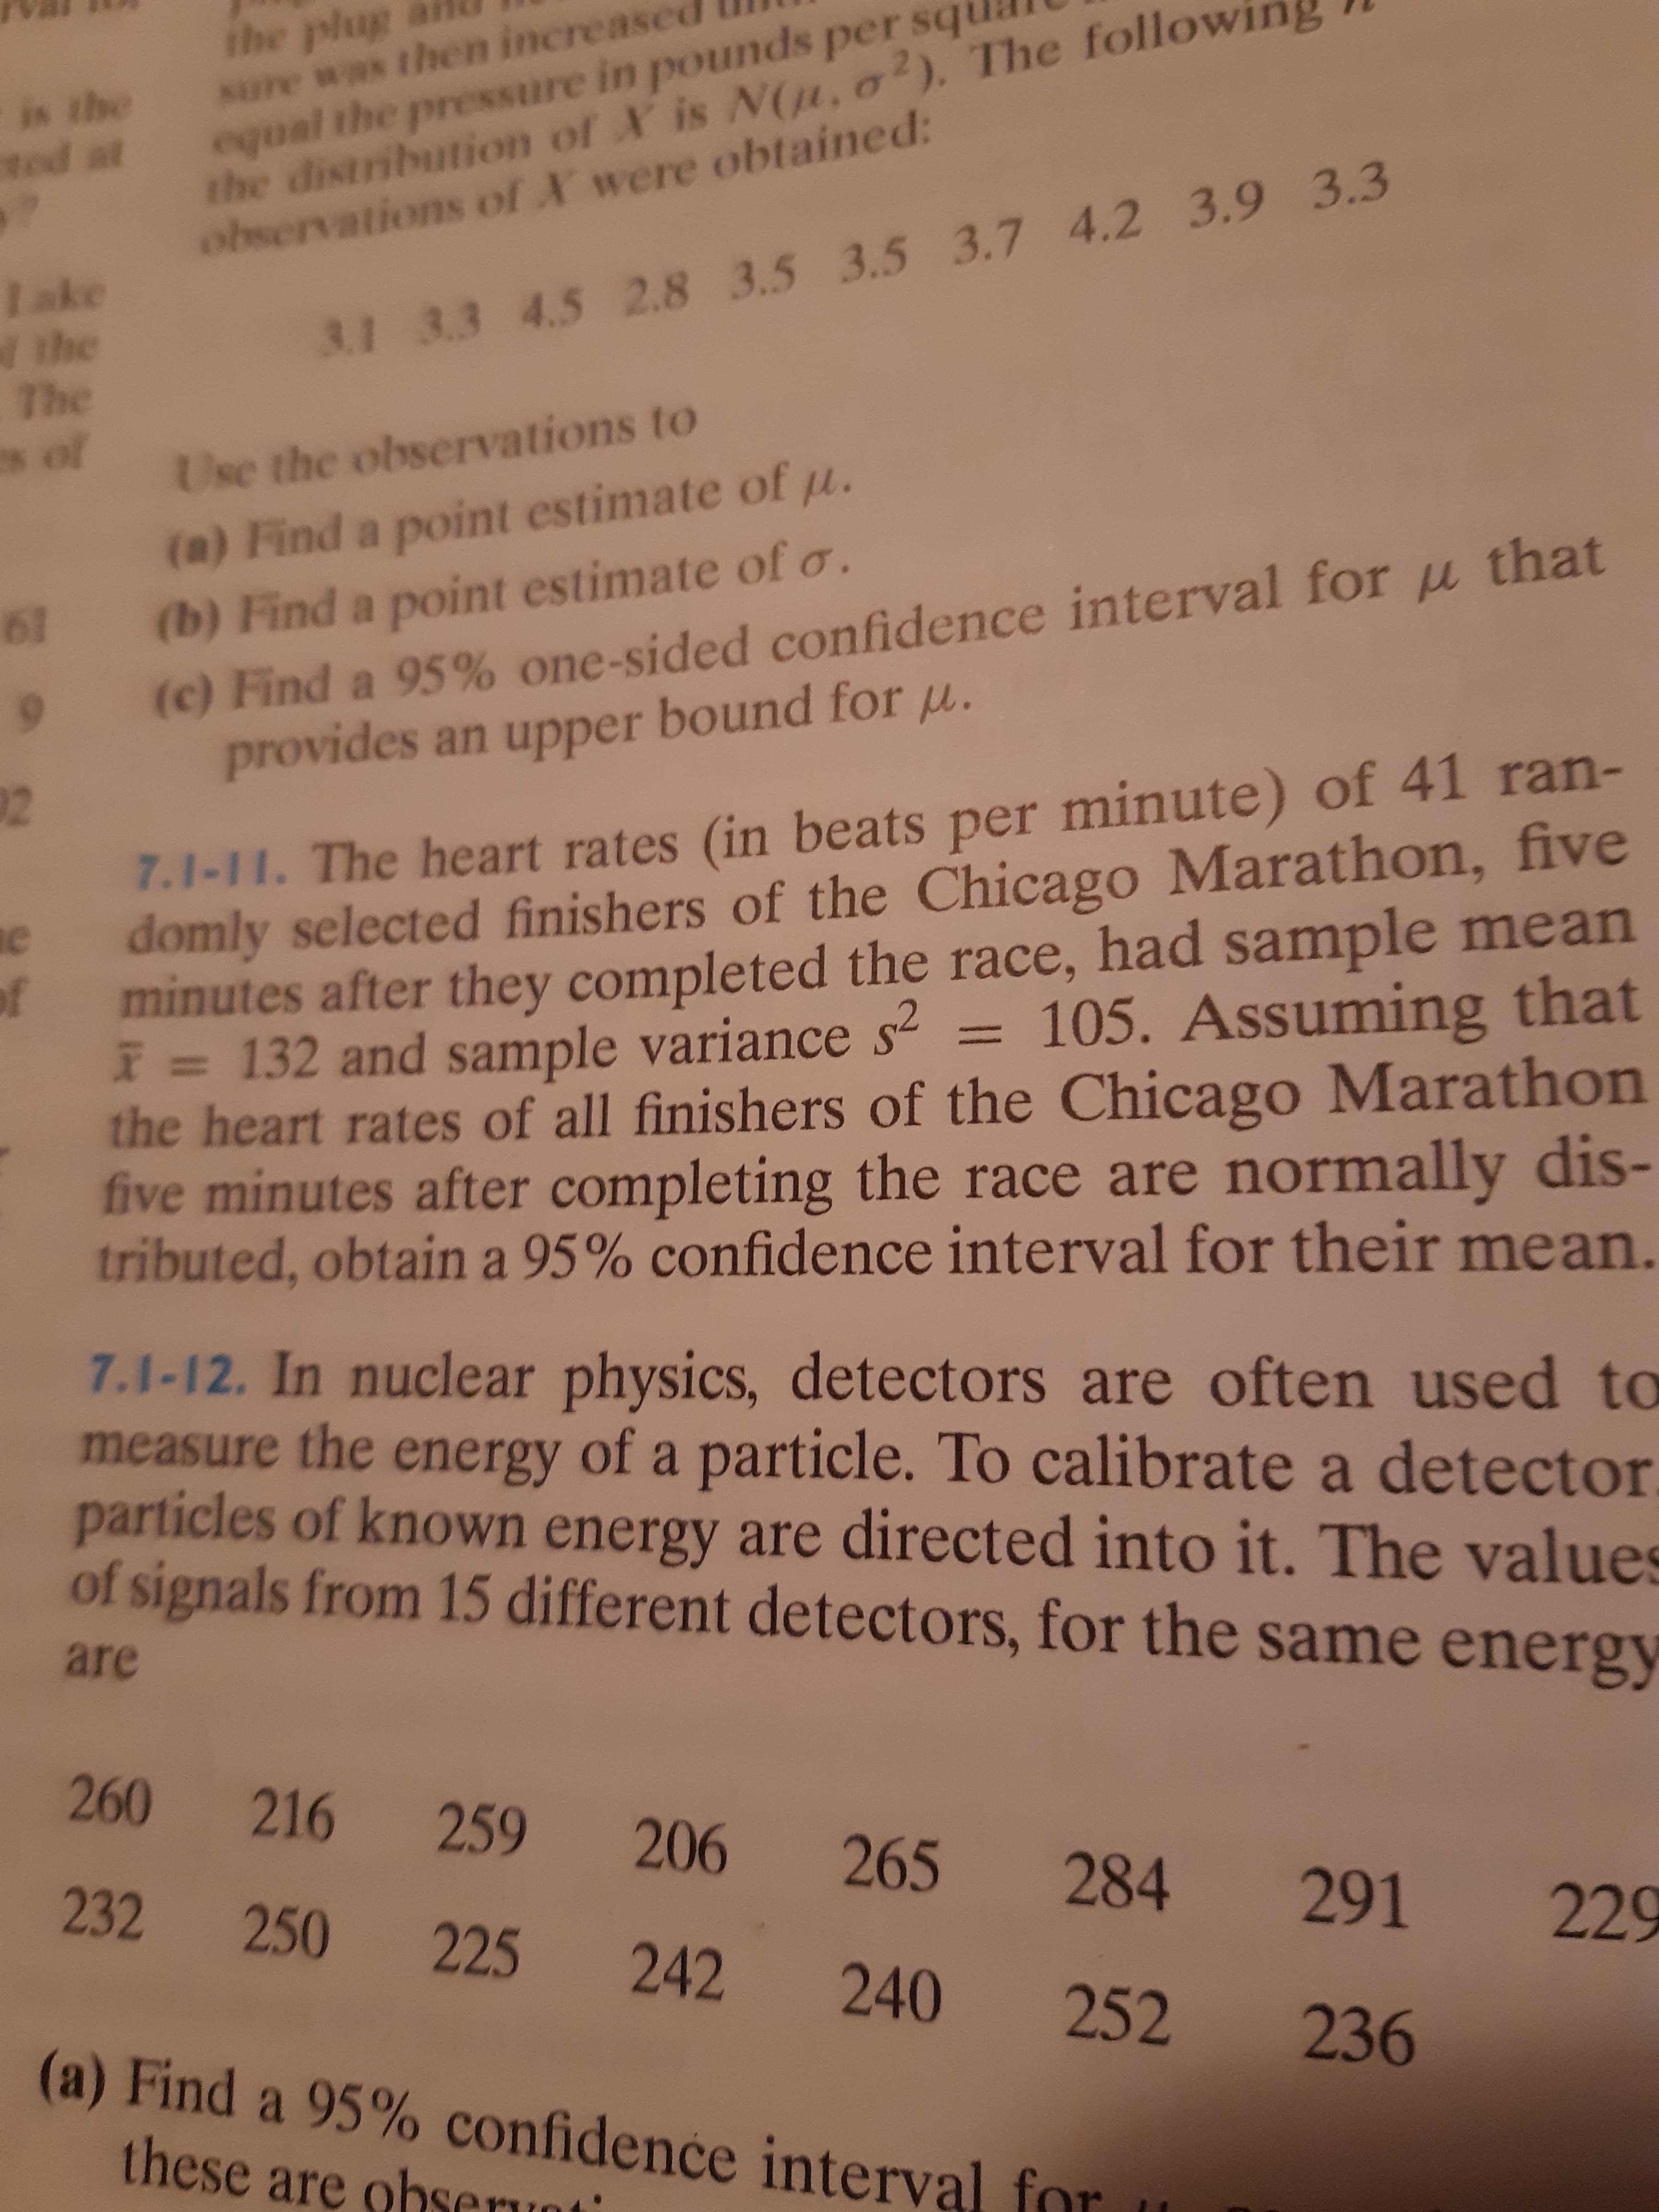 provides an up
7.1-11. The heart rates (in beats per minute) of 41 ran-
domly selected finishers of the Chicago Marathon, five
minutes after they completed the race, had sample mean
132 and sample variance s?
the heart rates of all finishers of the Chicago Marathon
five minutes after completing the race are normally dis-
tributed, obtain a 95% confidence interval for their mean
105. Assuming that
%3D
%3D
